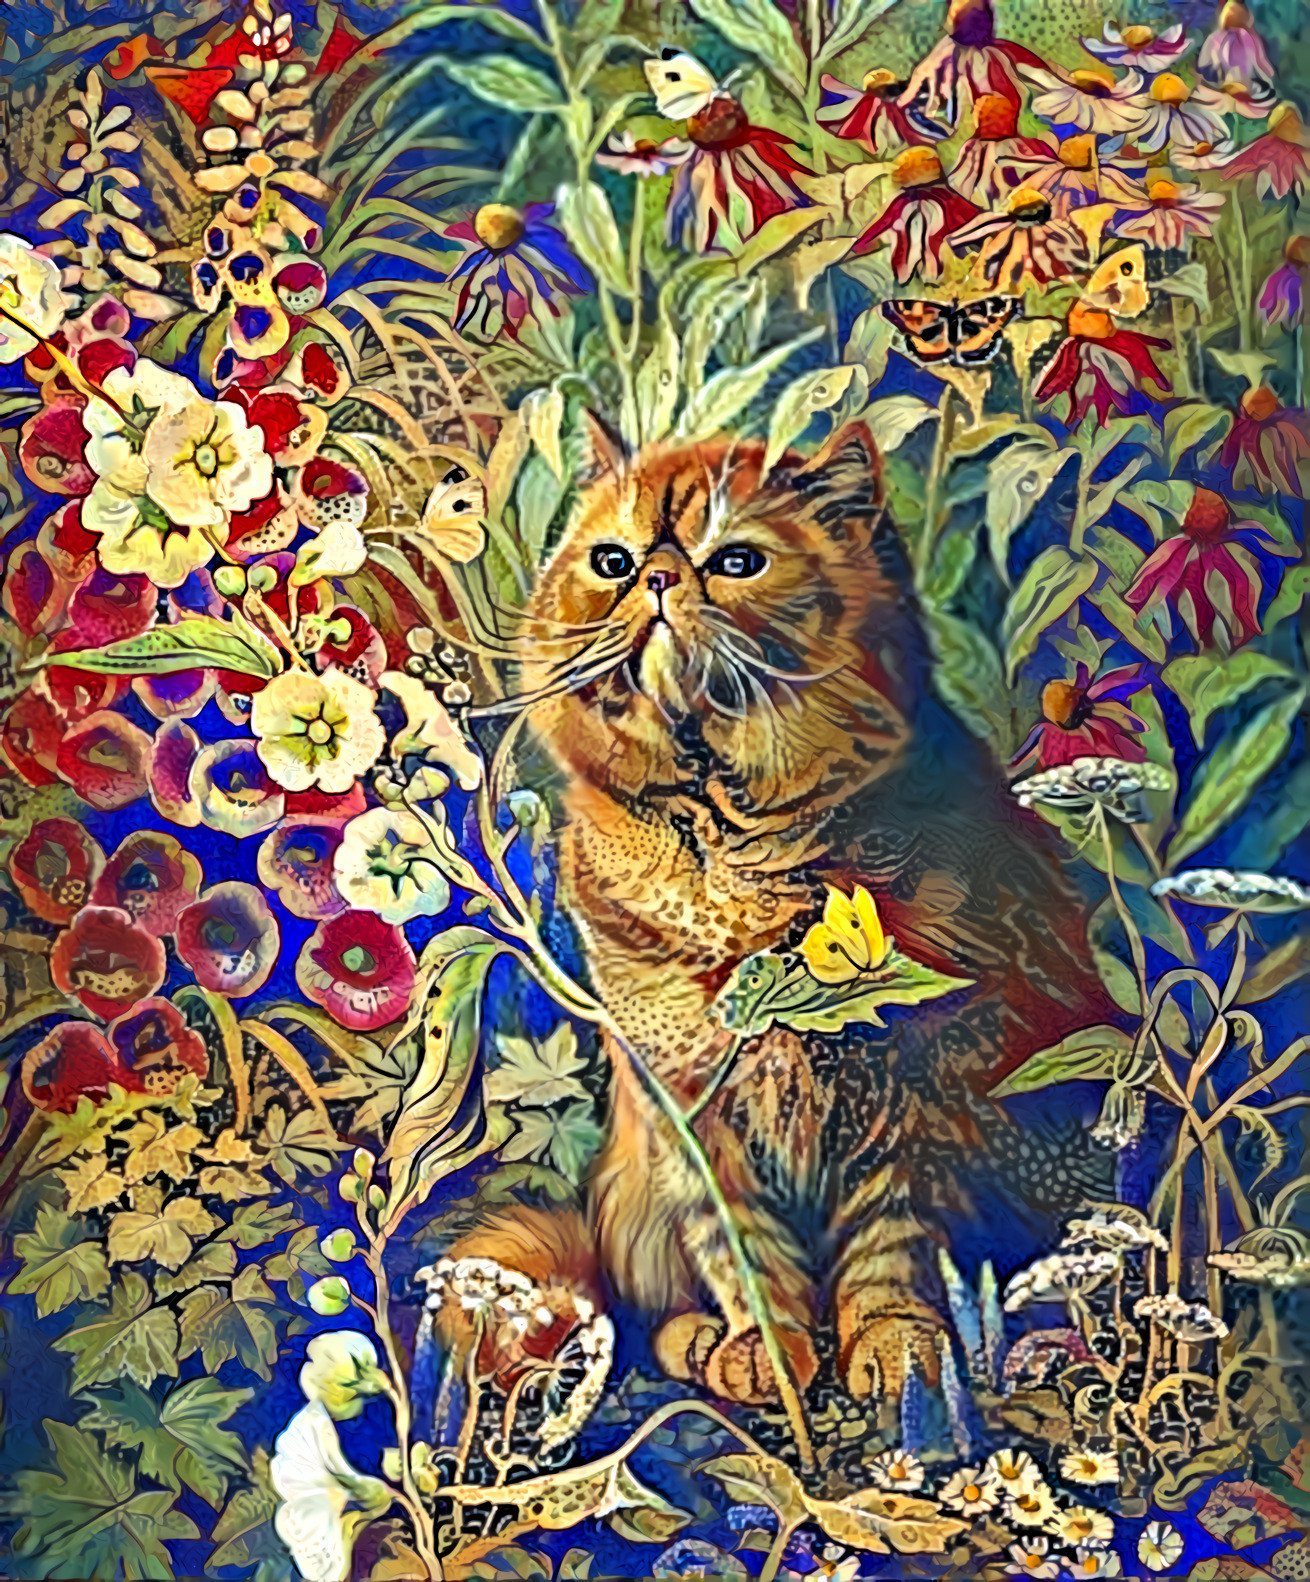 Colorful Cat [FHD]